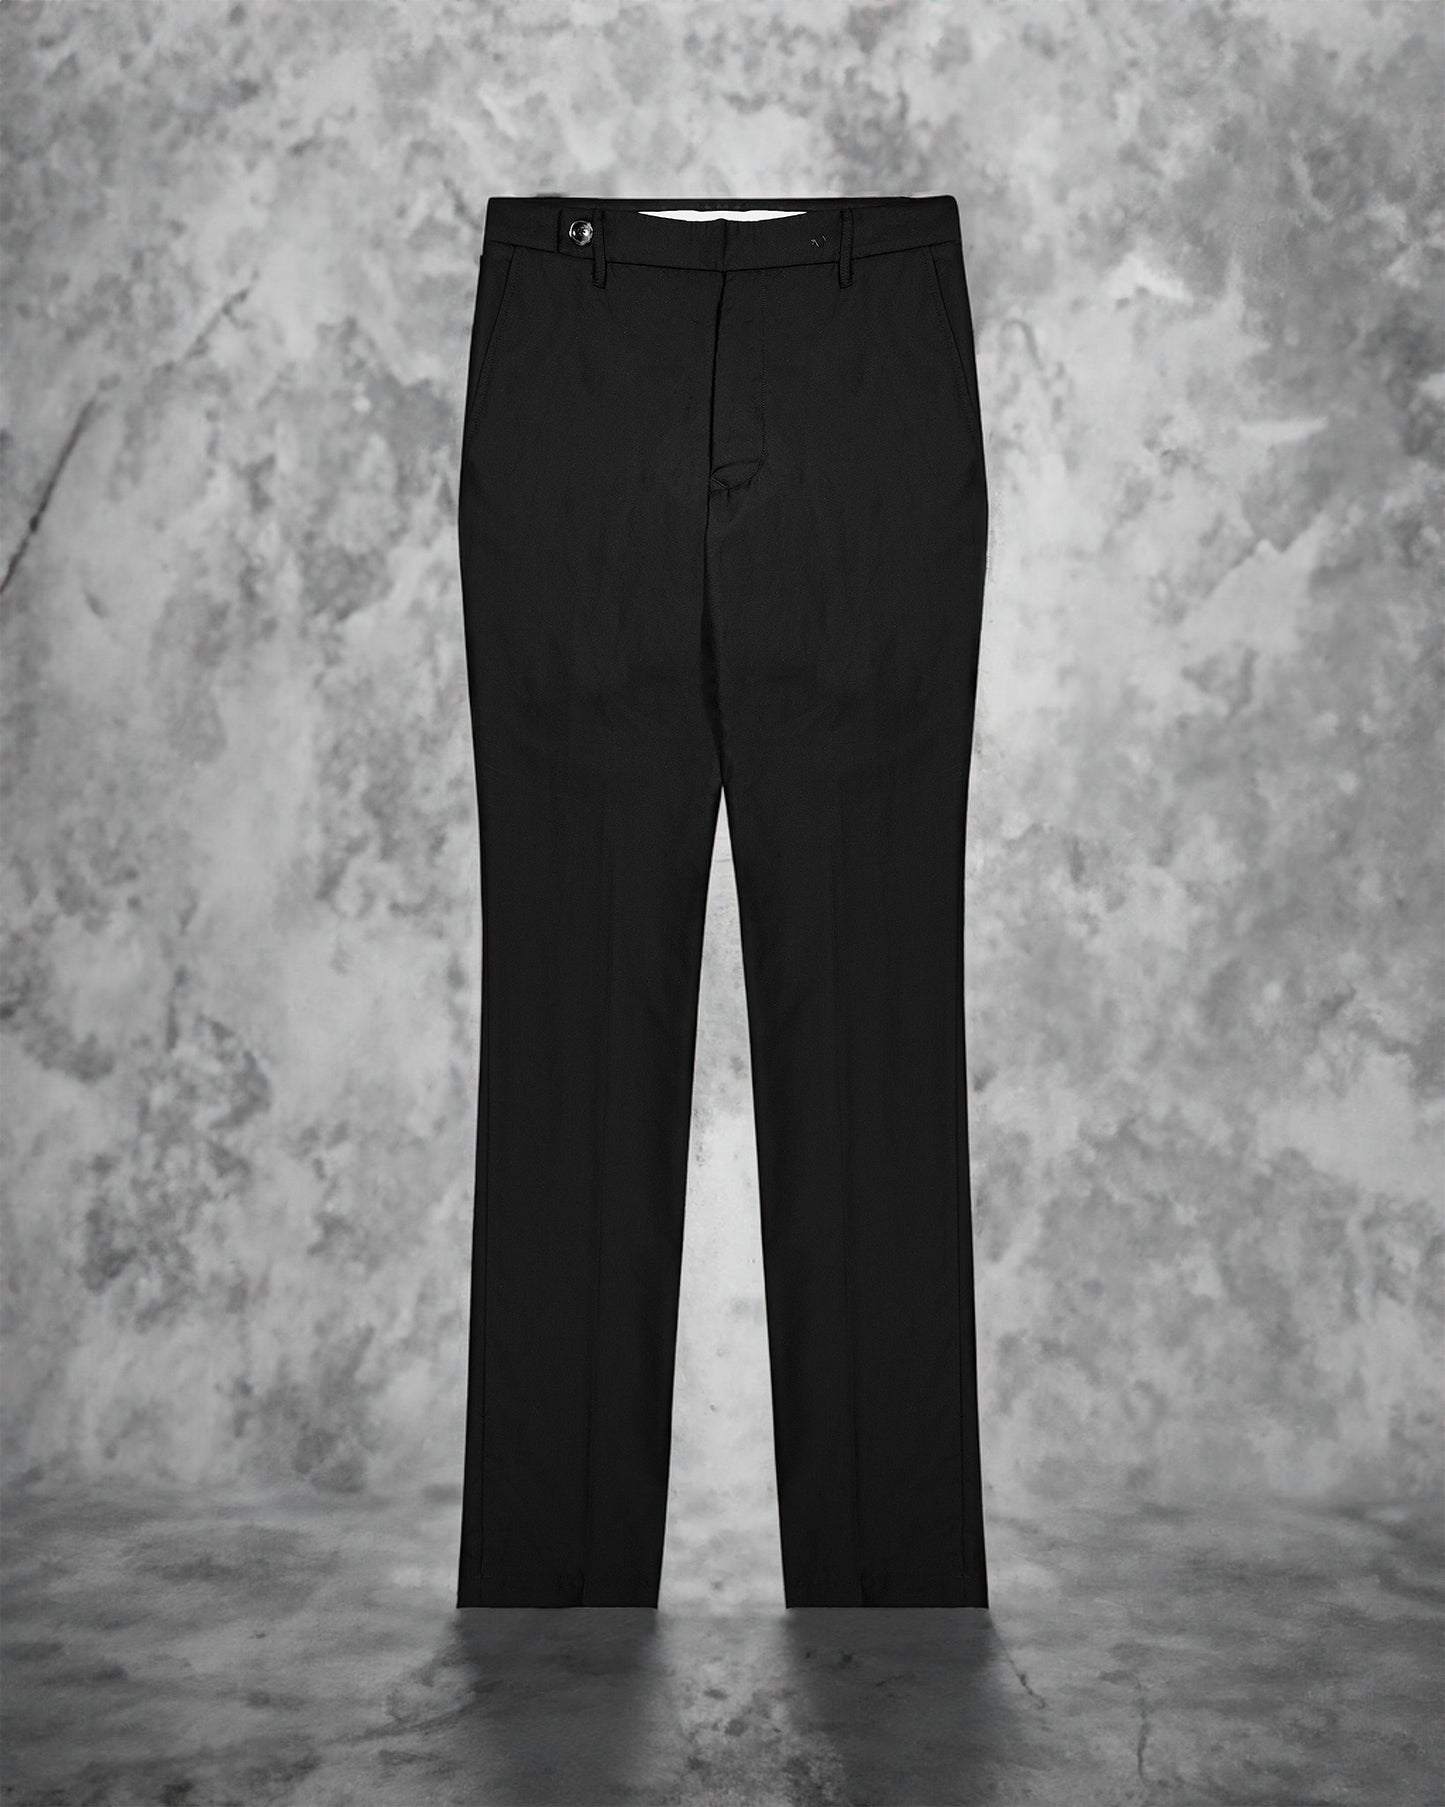 Rick Owens Mainline Wool Trousers - SS14 “Vicious”